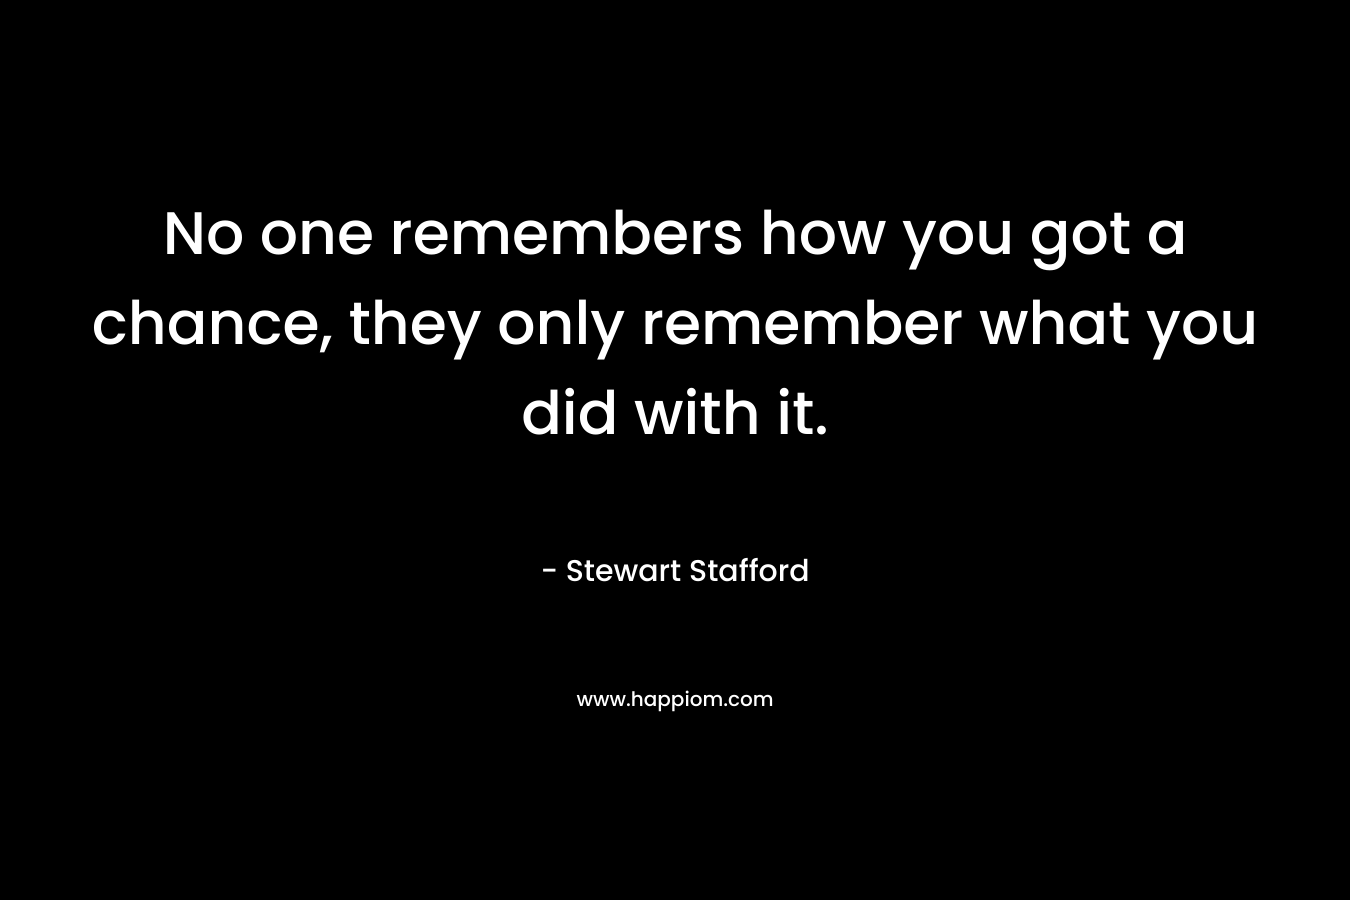 No one remembers how you got a chance, they only remember what you did with it. – Stewart Stafford